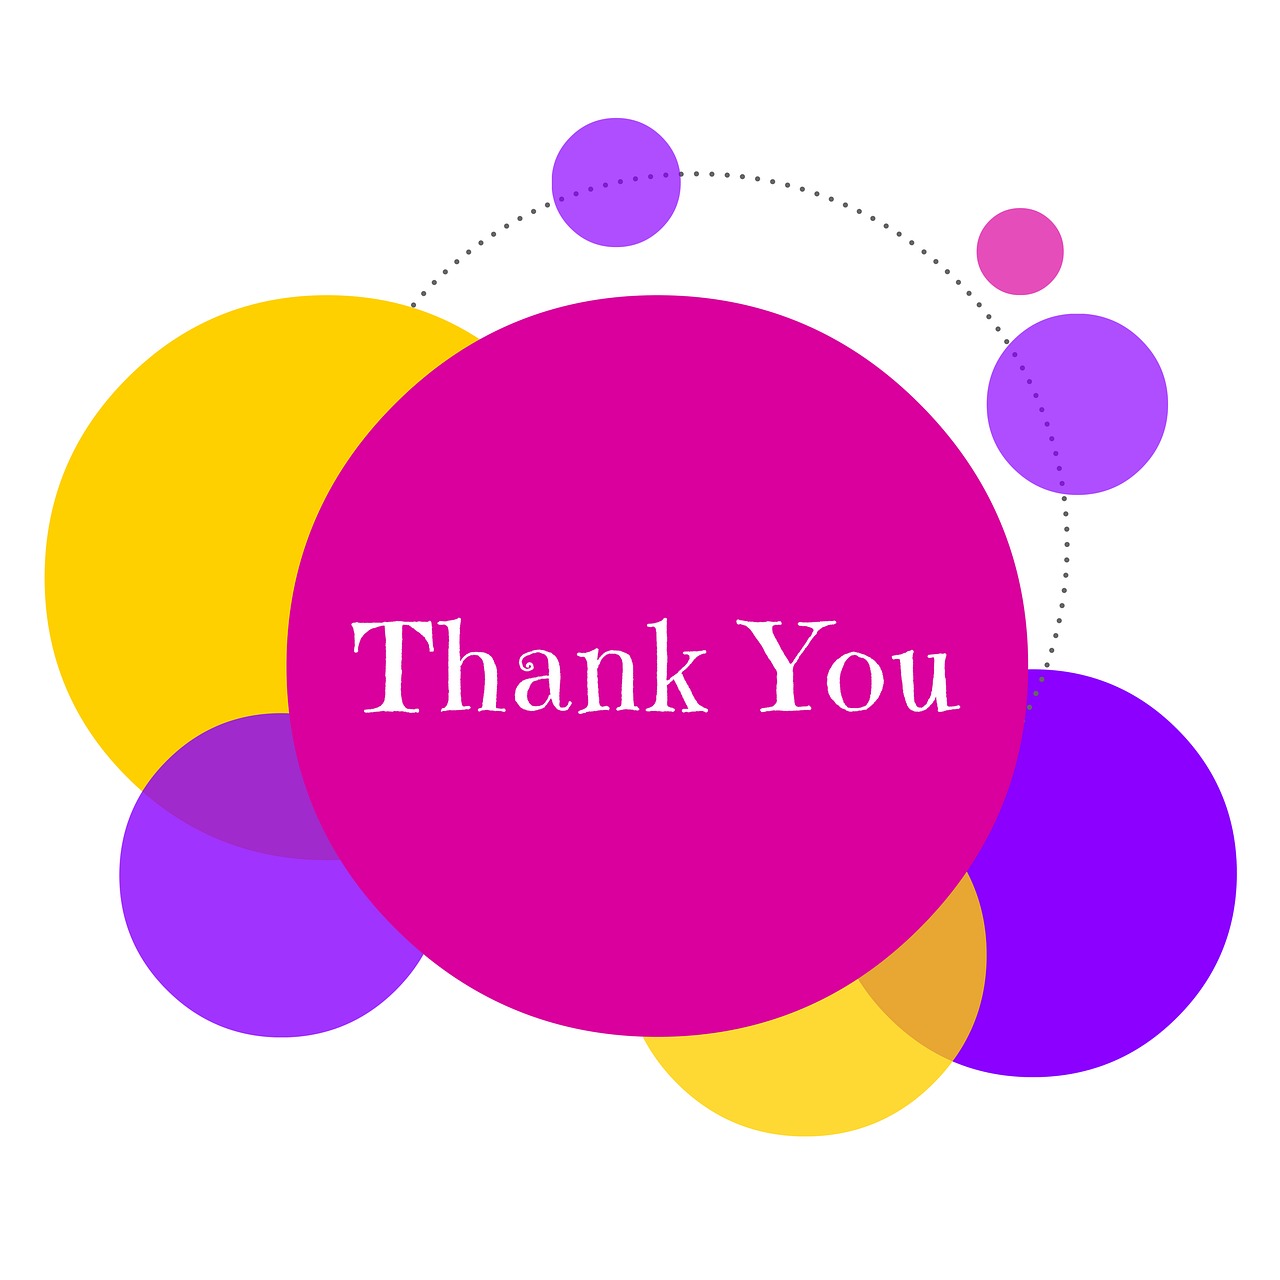 Thank You Message in Colored Bubbles